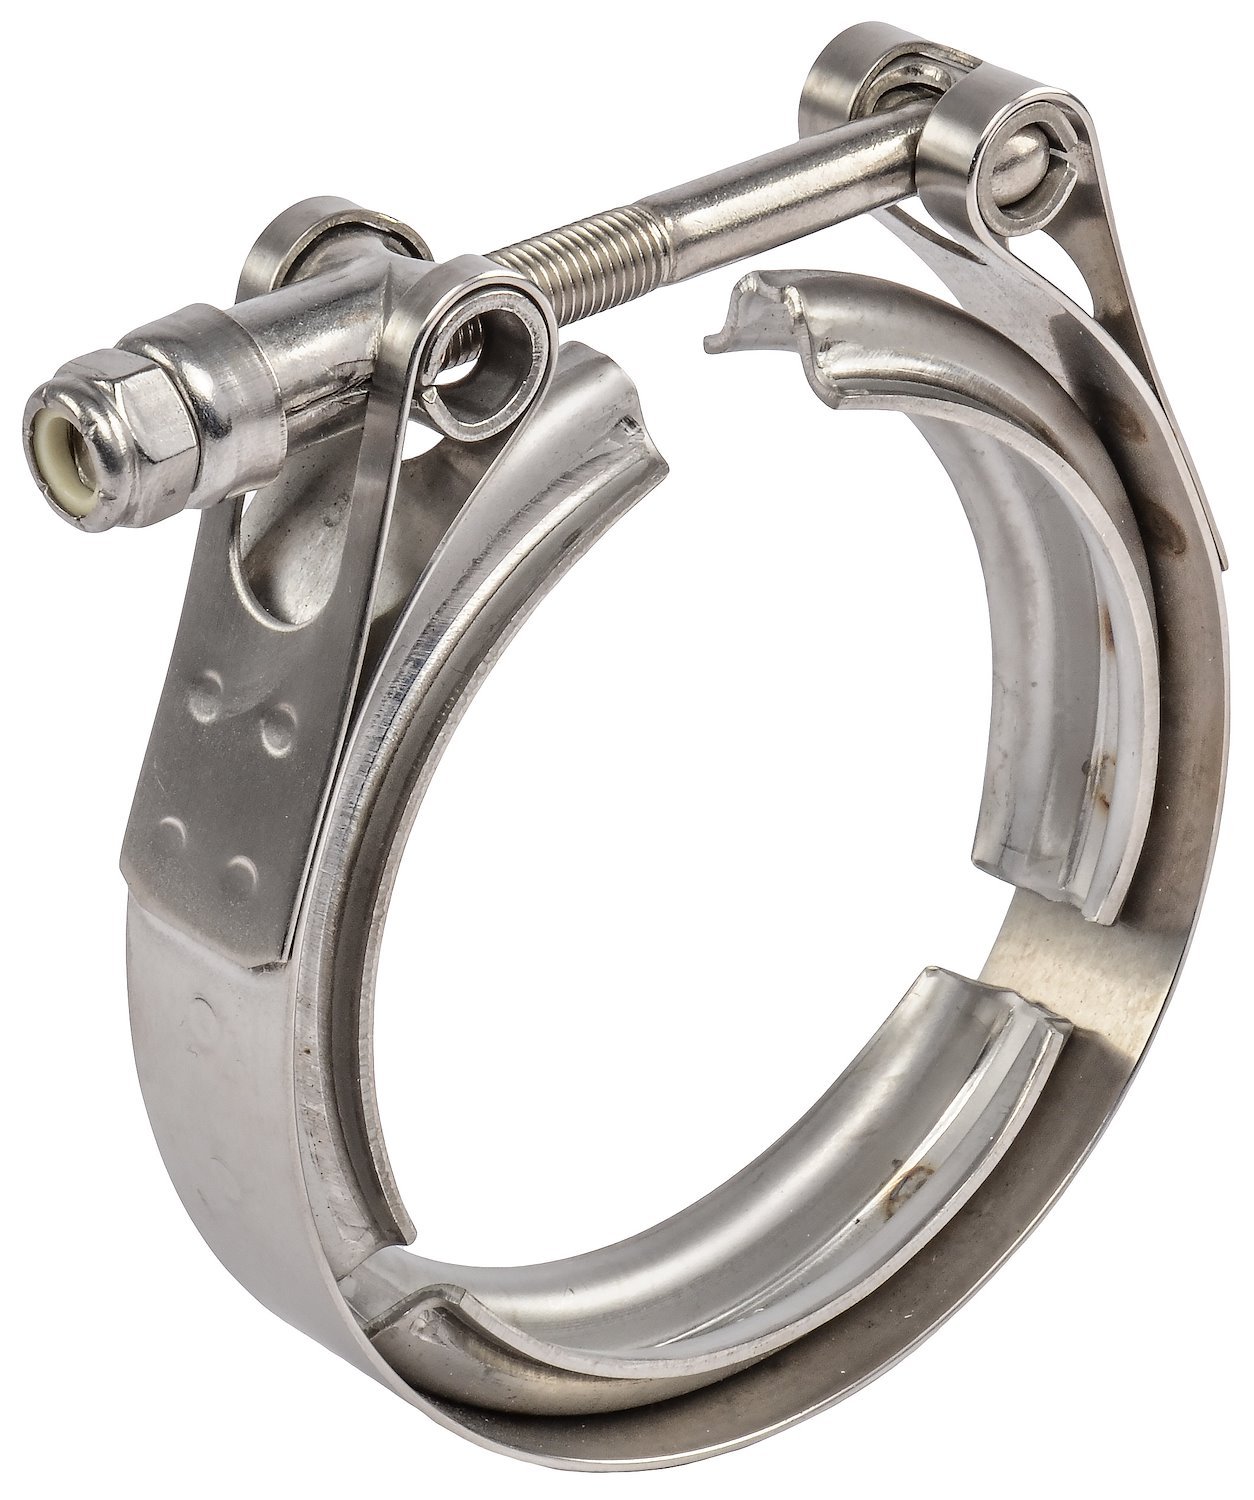 Stainless Steel Standard V-Band Clamp 3 in.